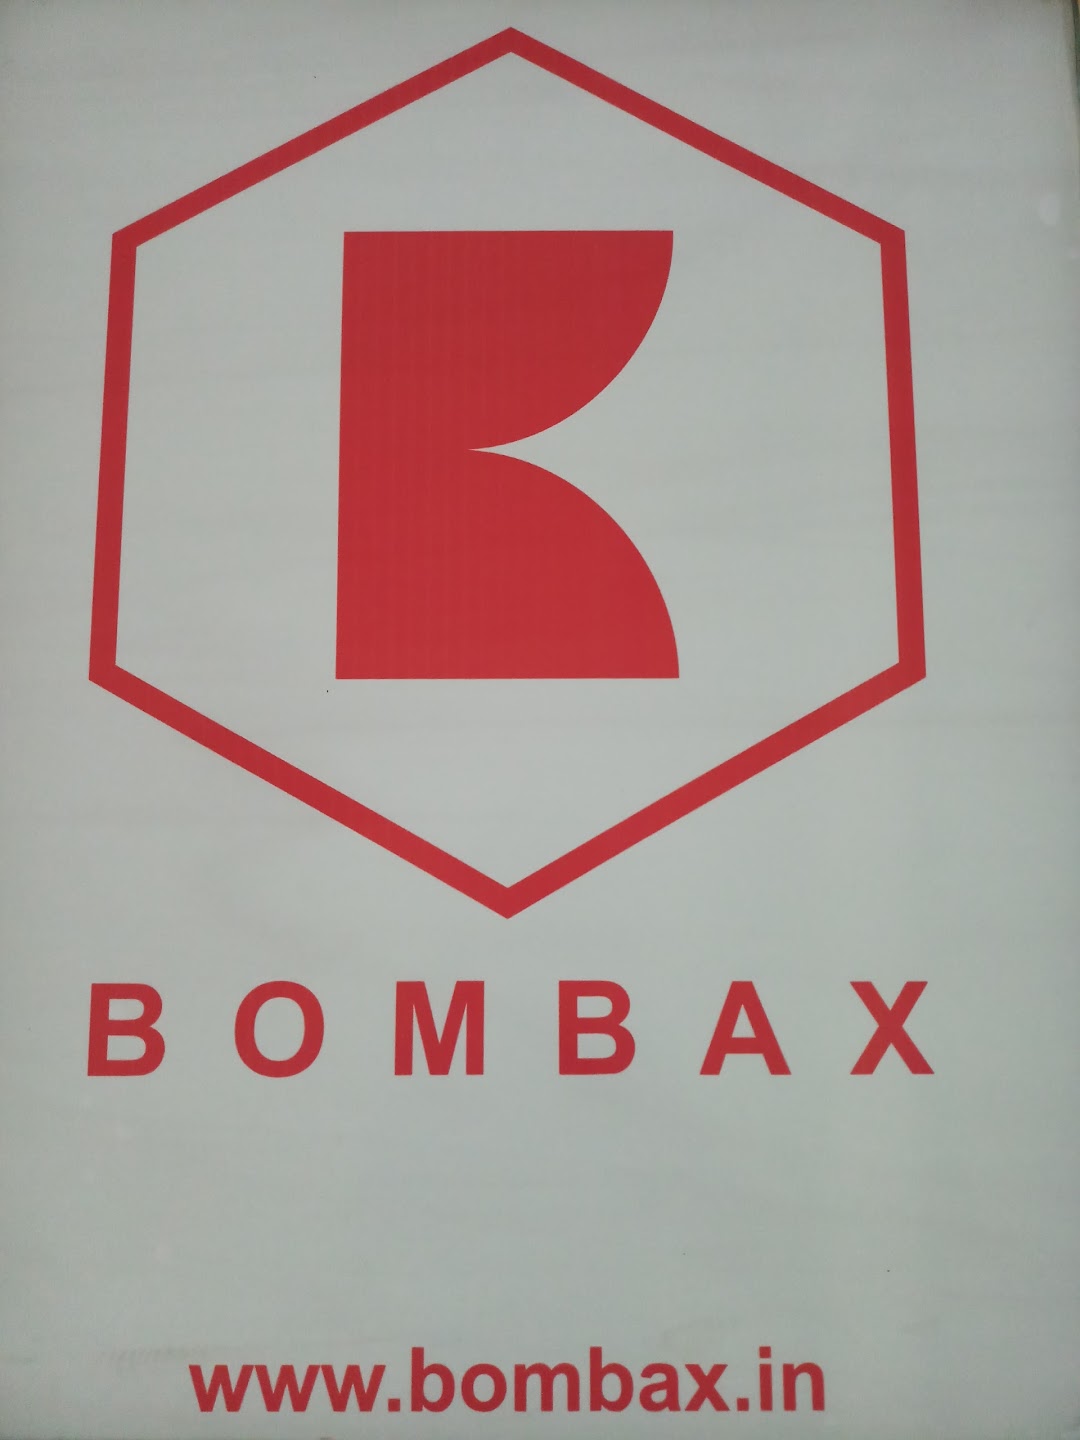 Bombax Couriers LLP